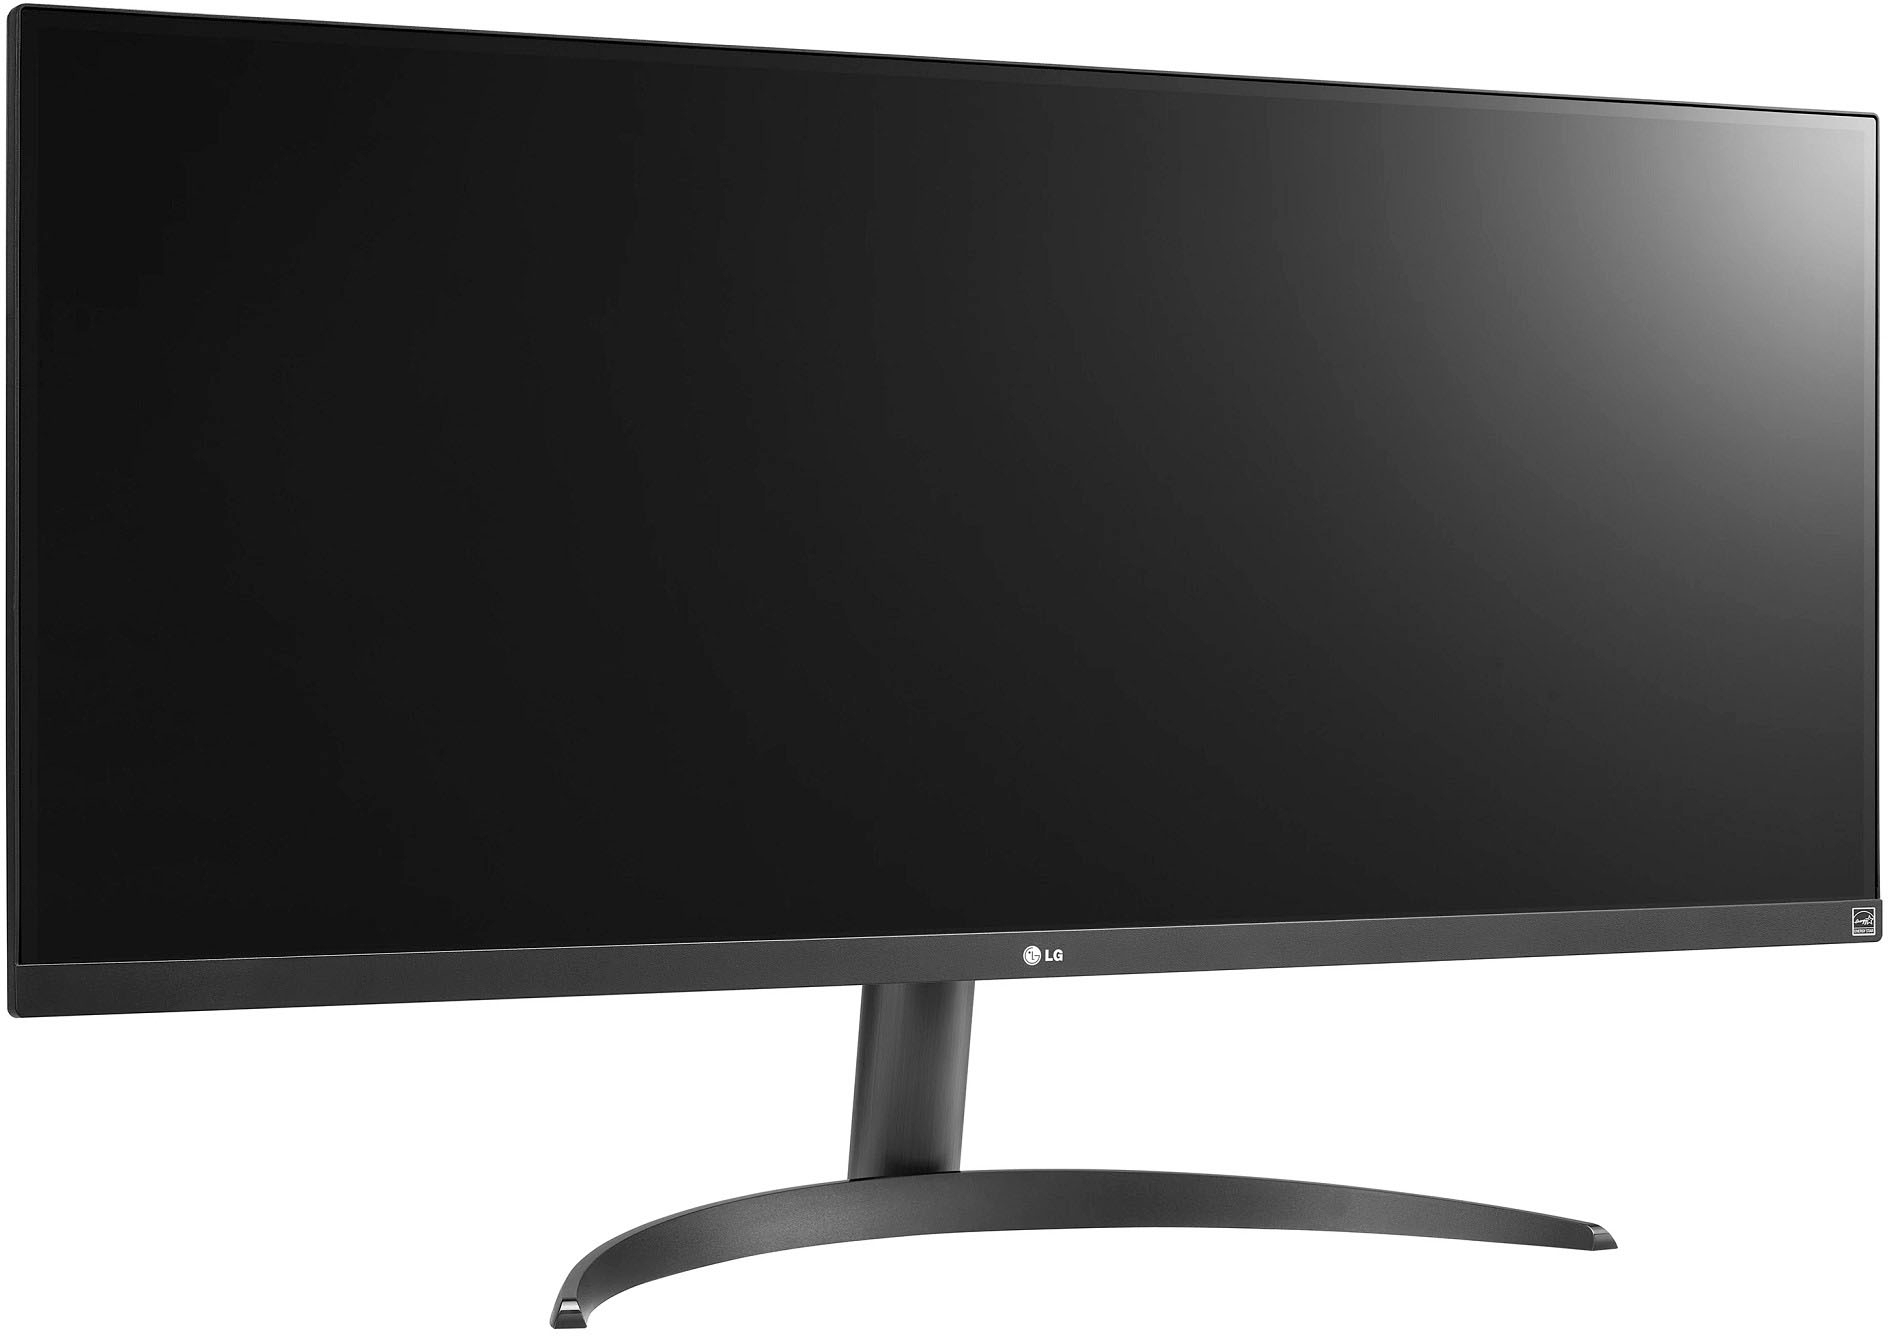 Back View: LG - 34" IPS LED UltraWide FHD 100Hz AMD FreeSync Monitor with HDR (HDMI, DisplayPort) - Black